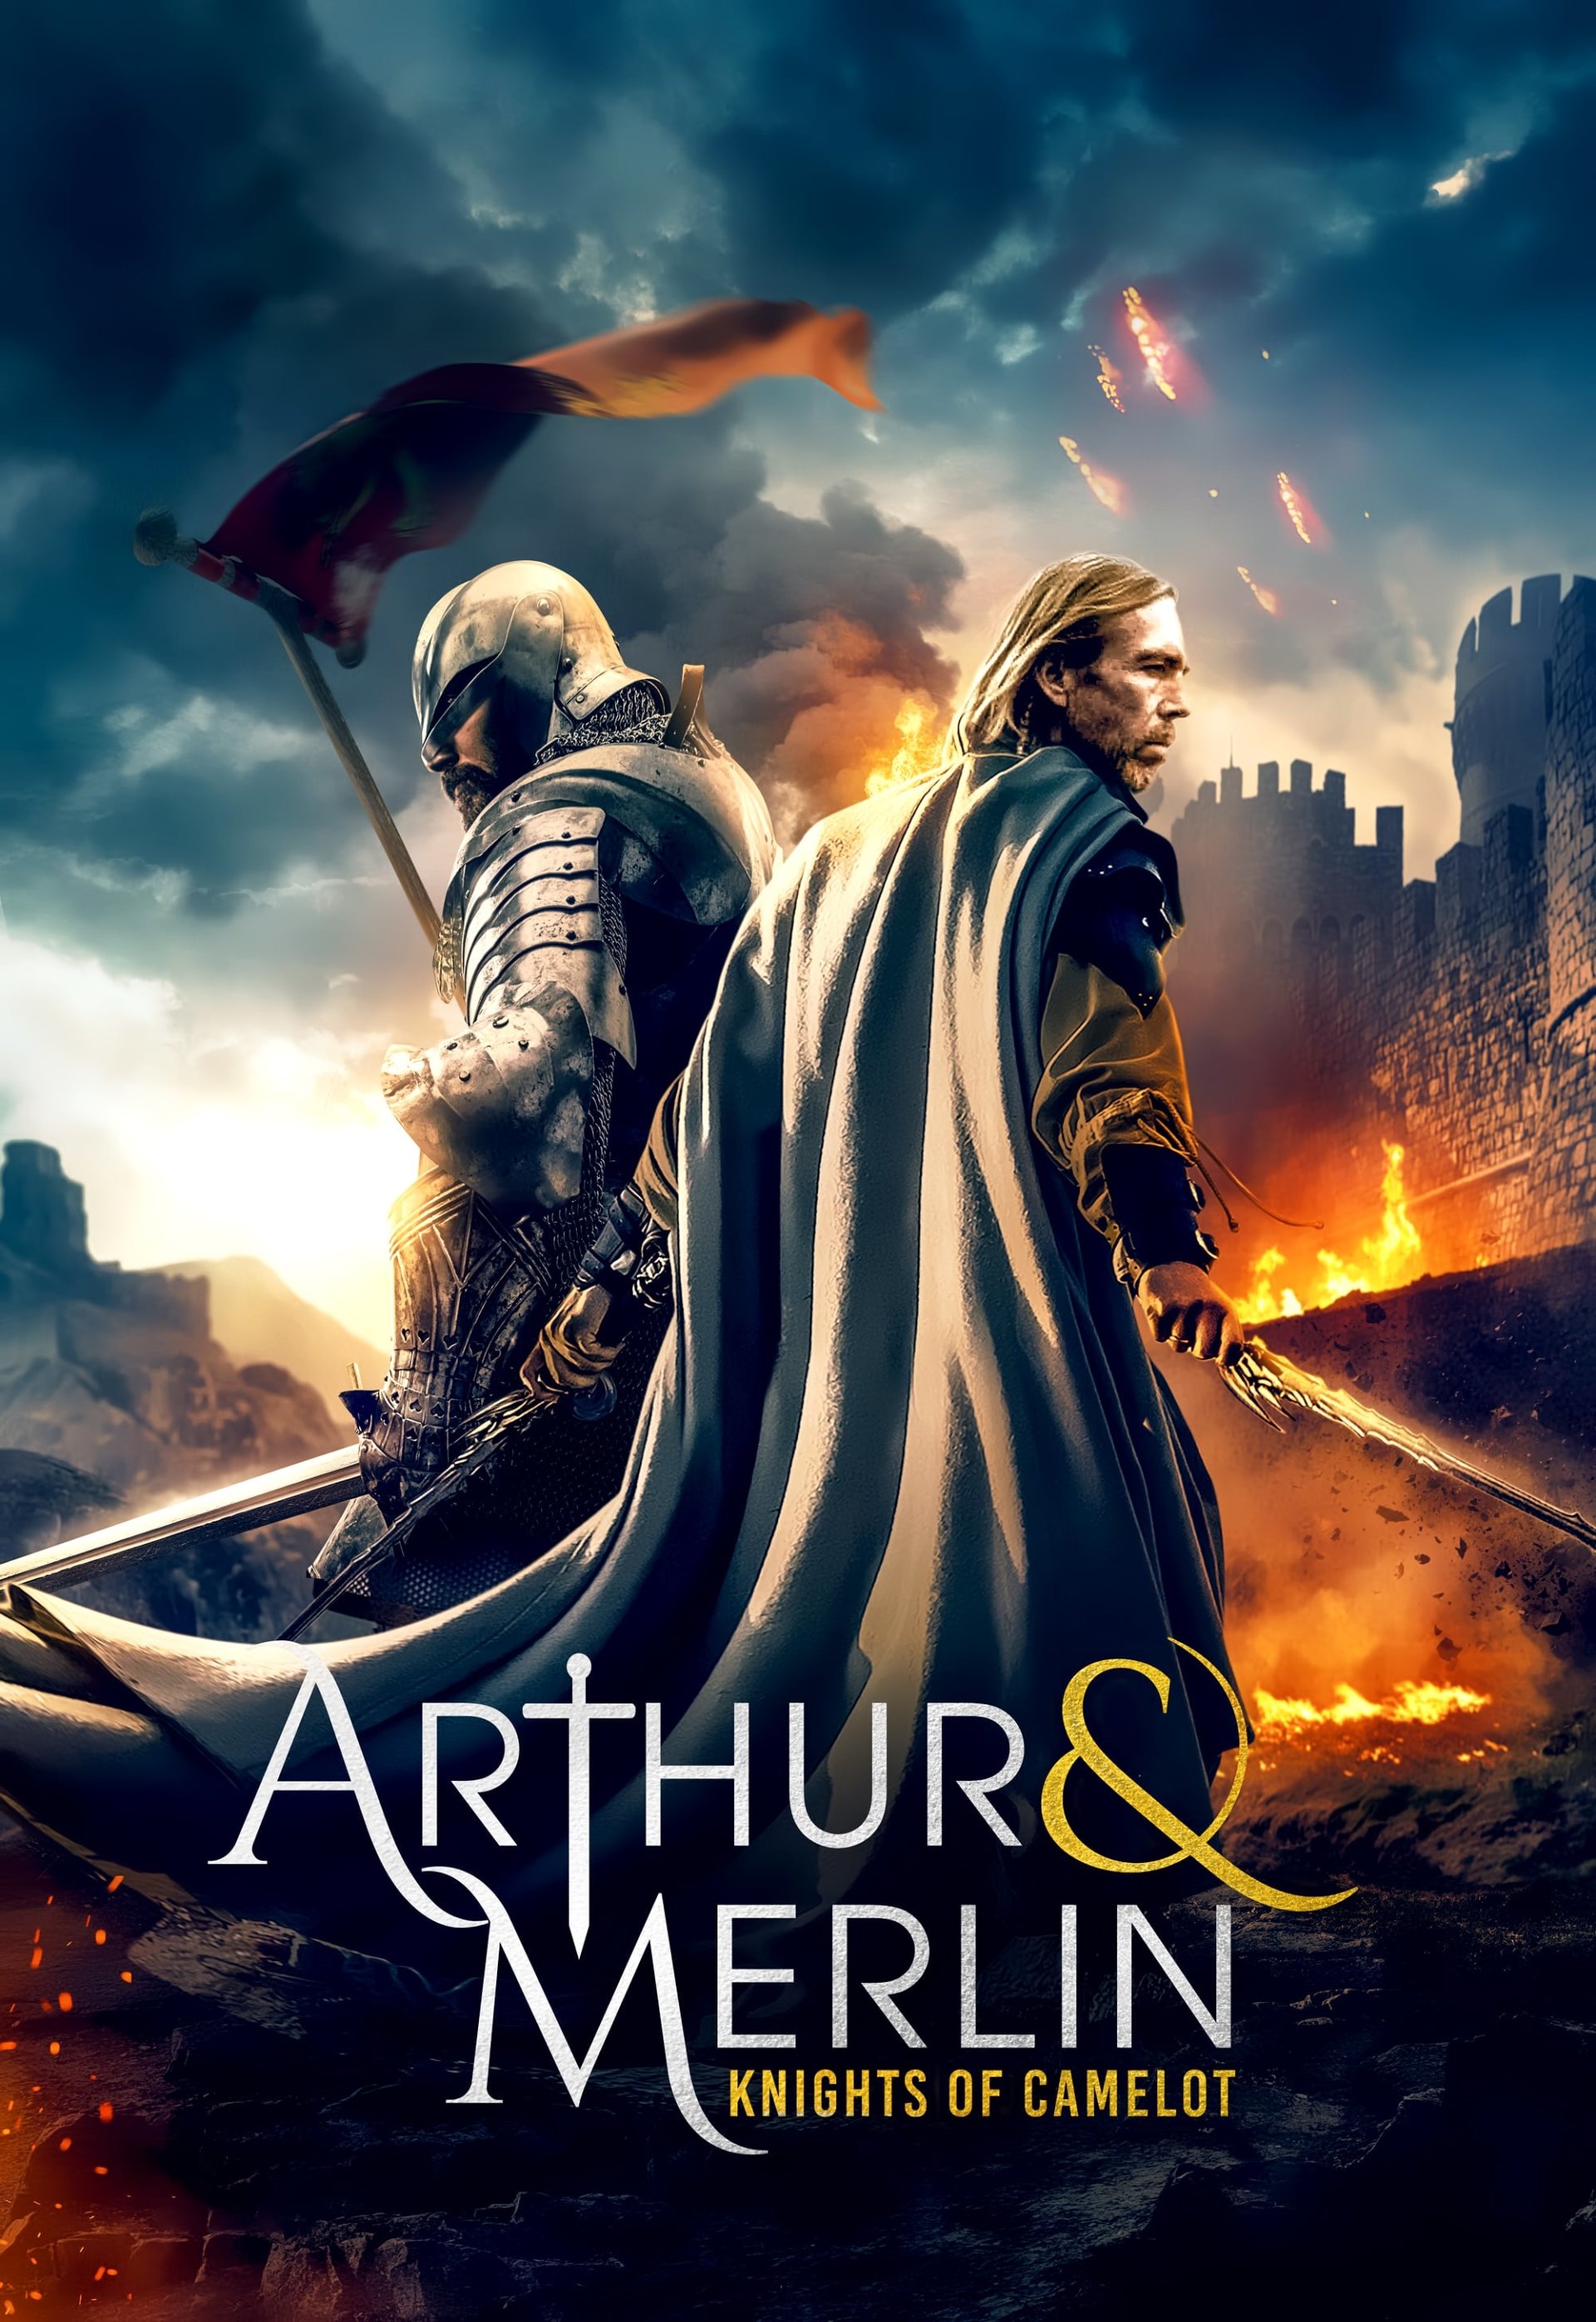 Arthur & Merlin Knights of Camelot Movie Poster ID 392479 Image Abyss